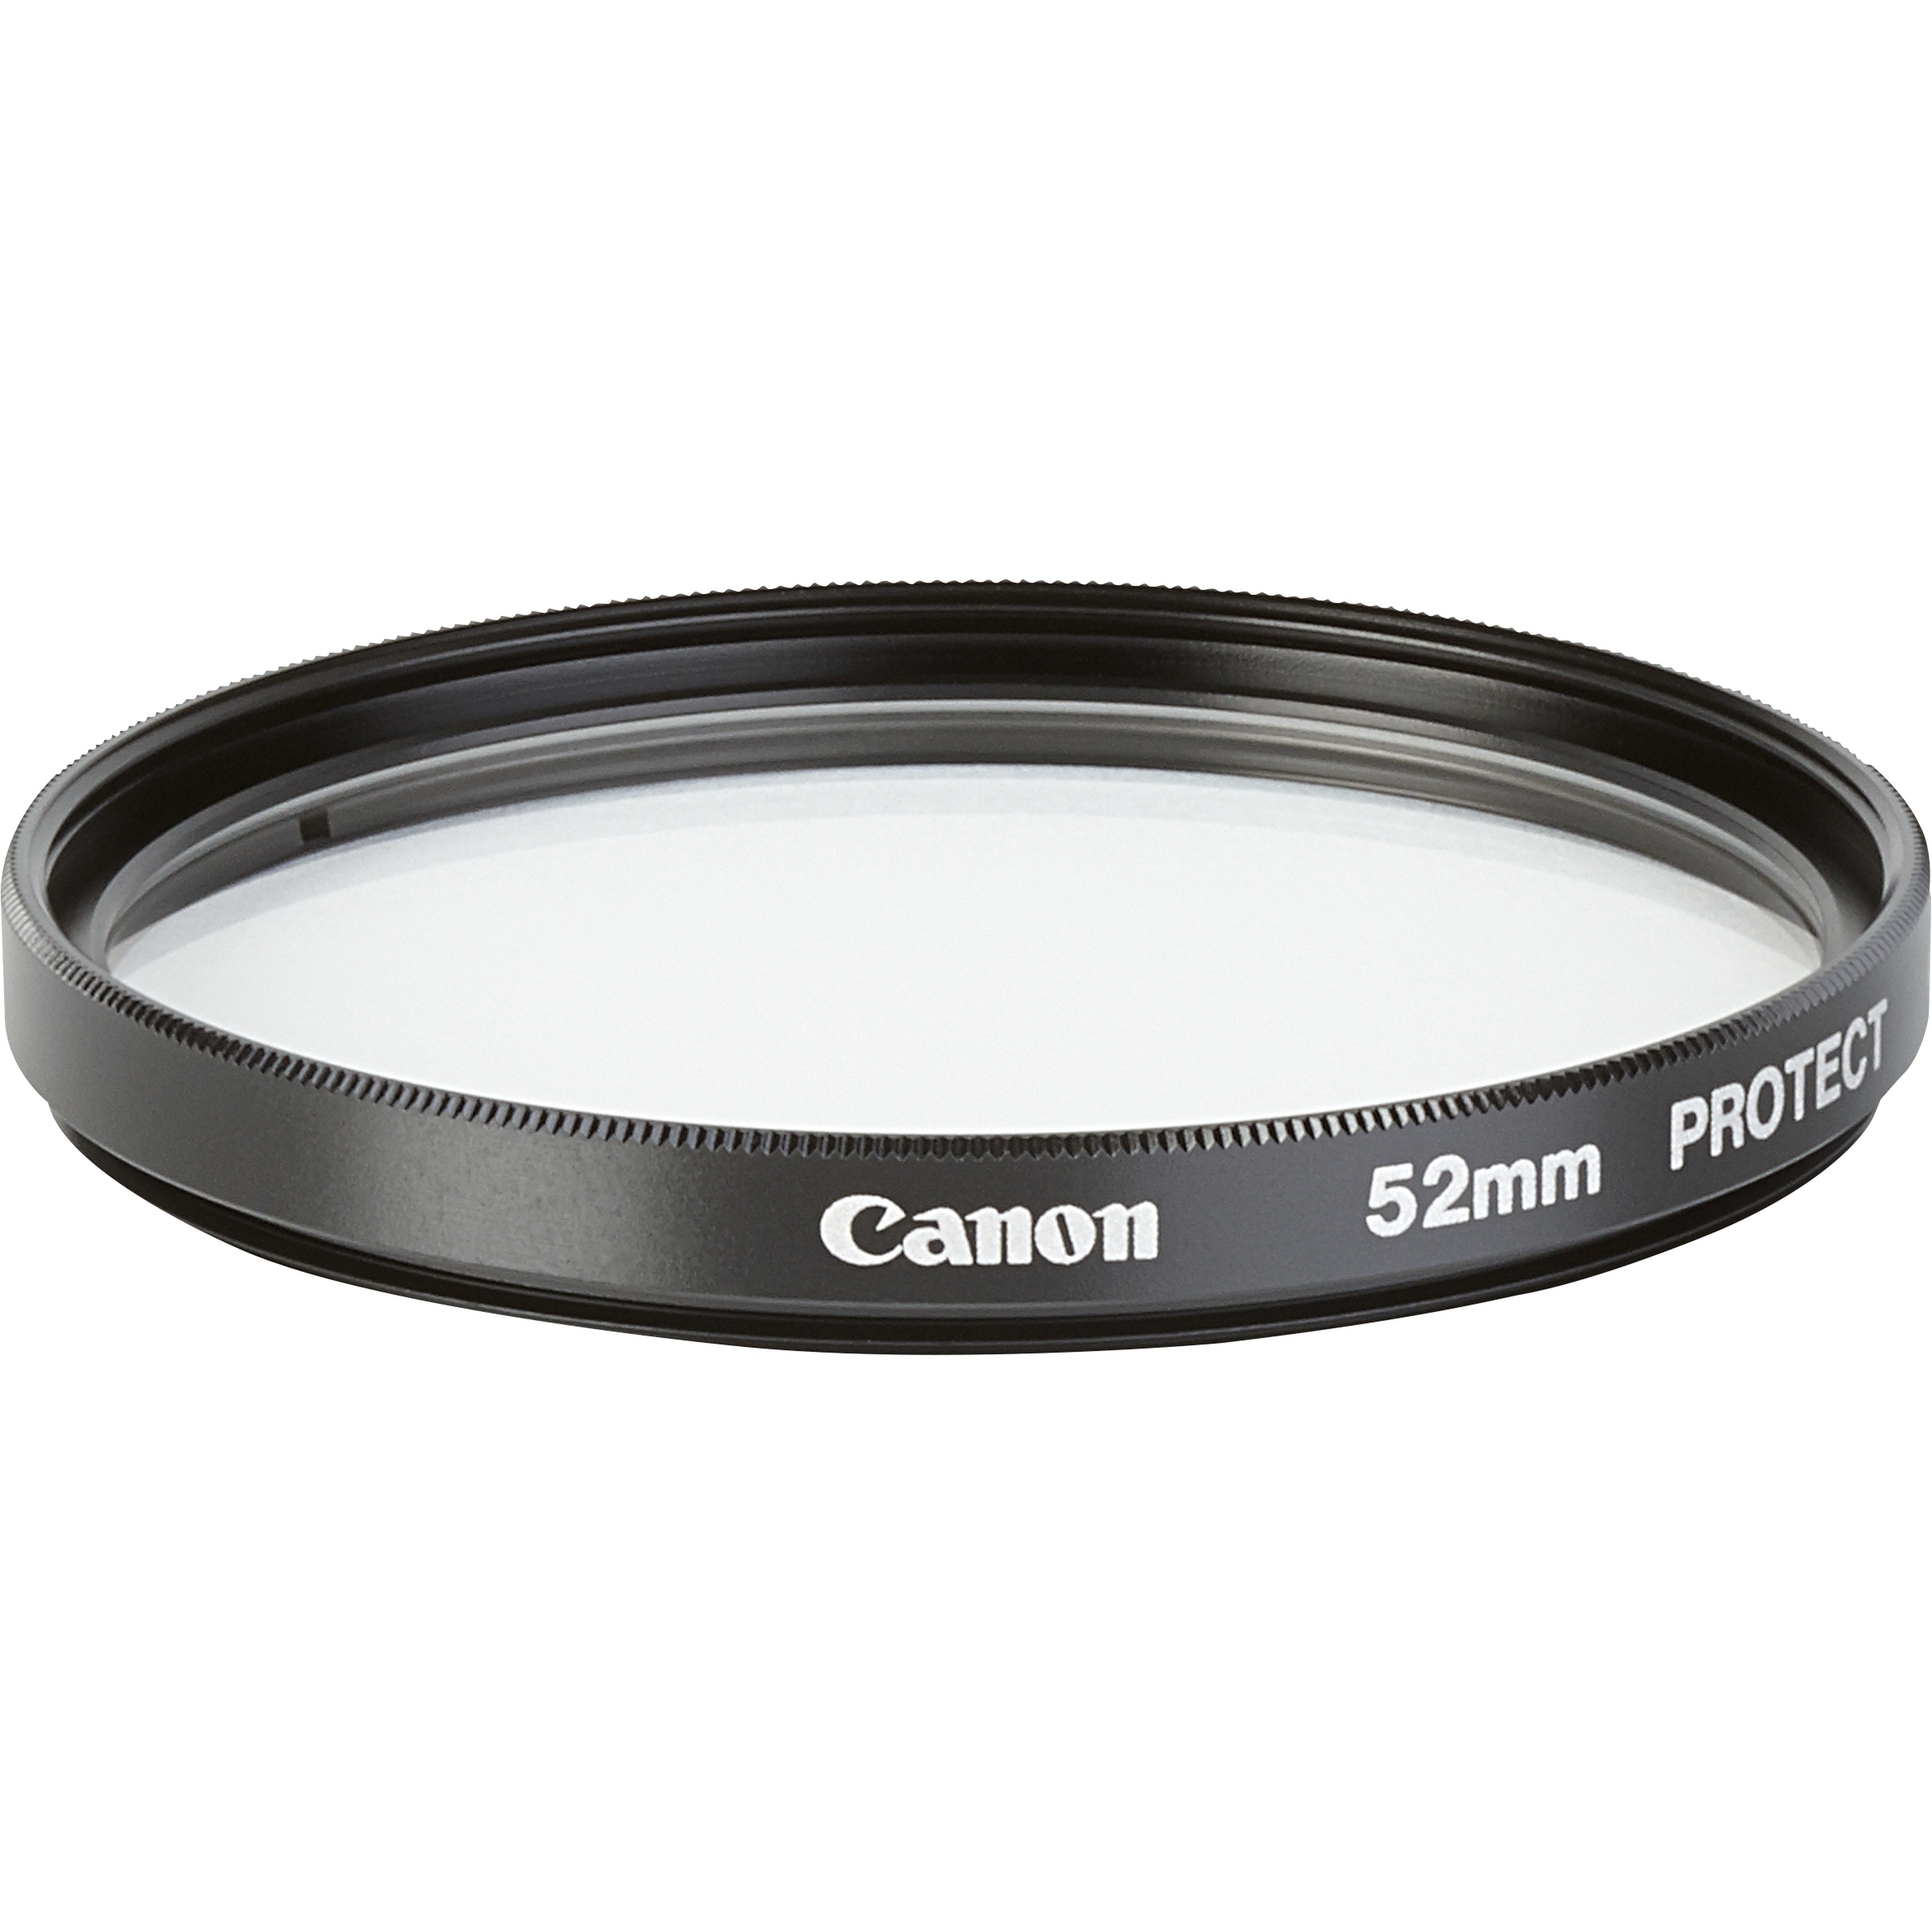 Canon - Filter - protection - 52 mm - for EF